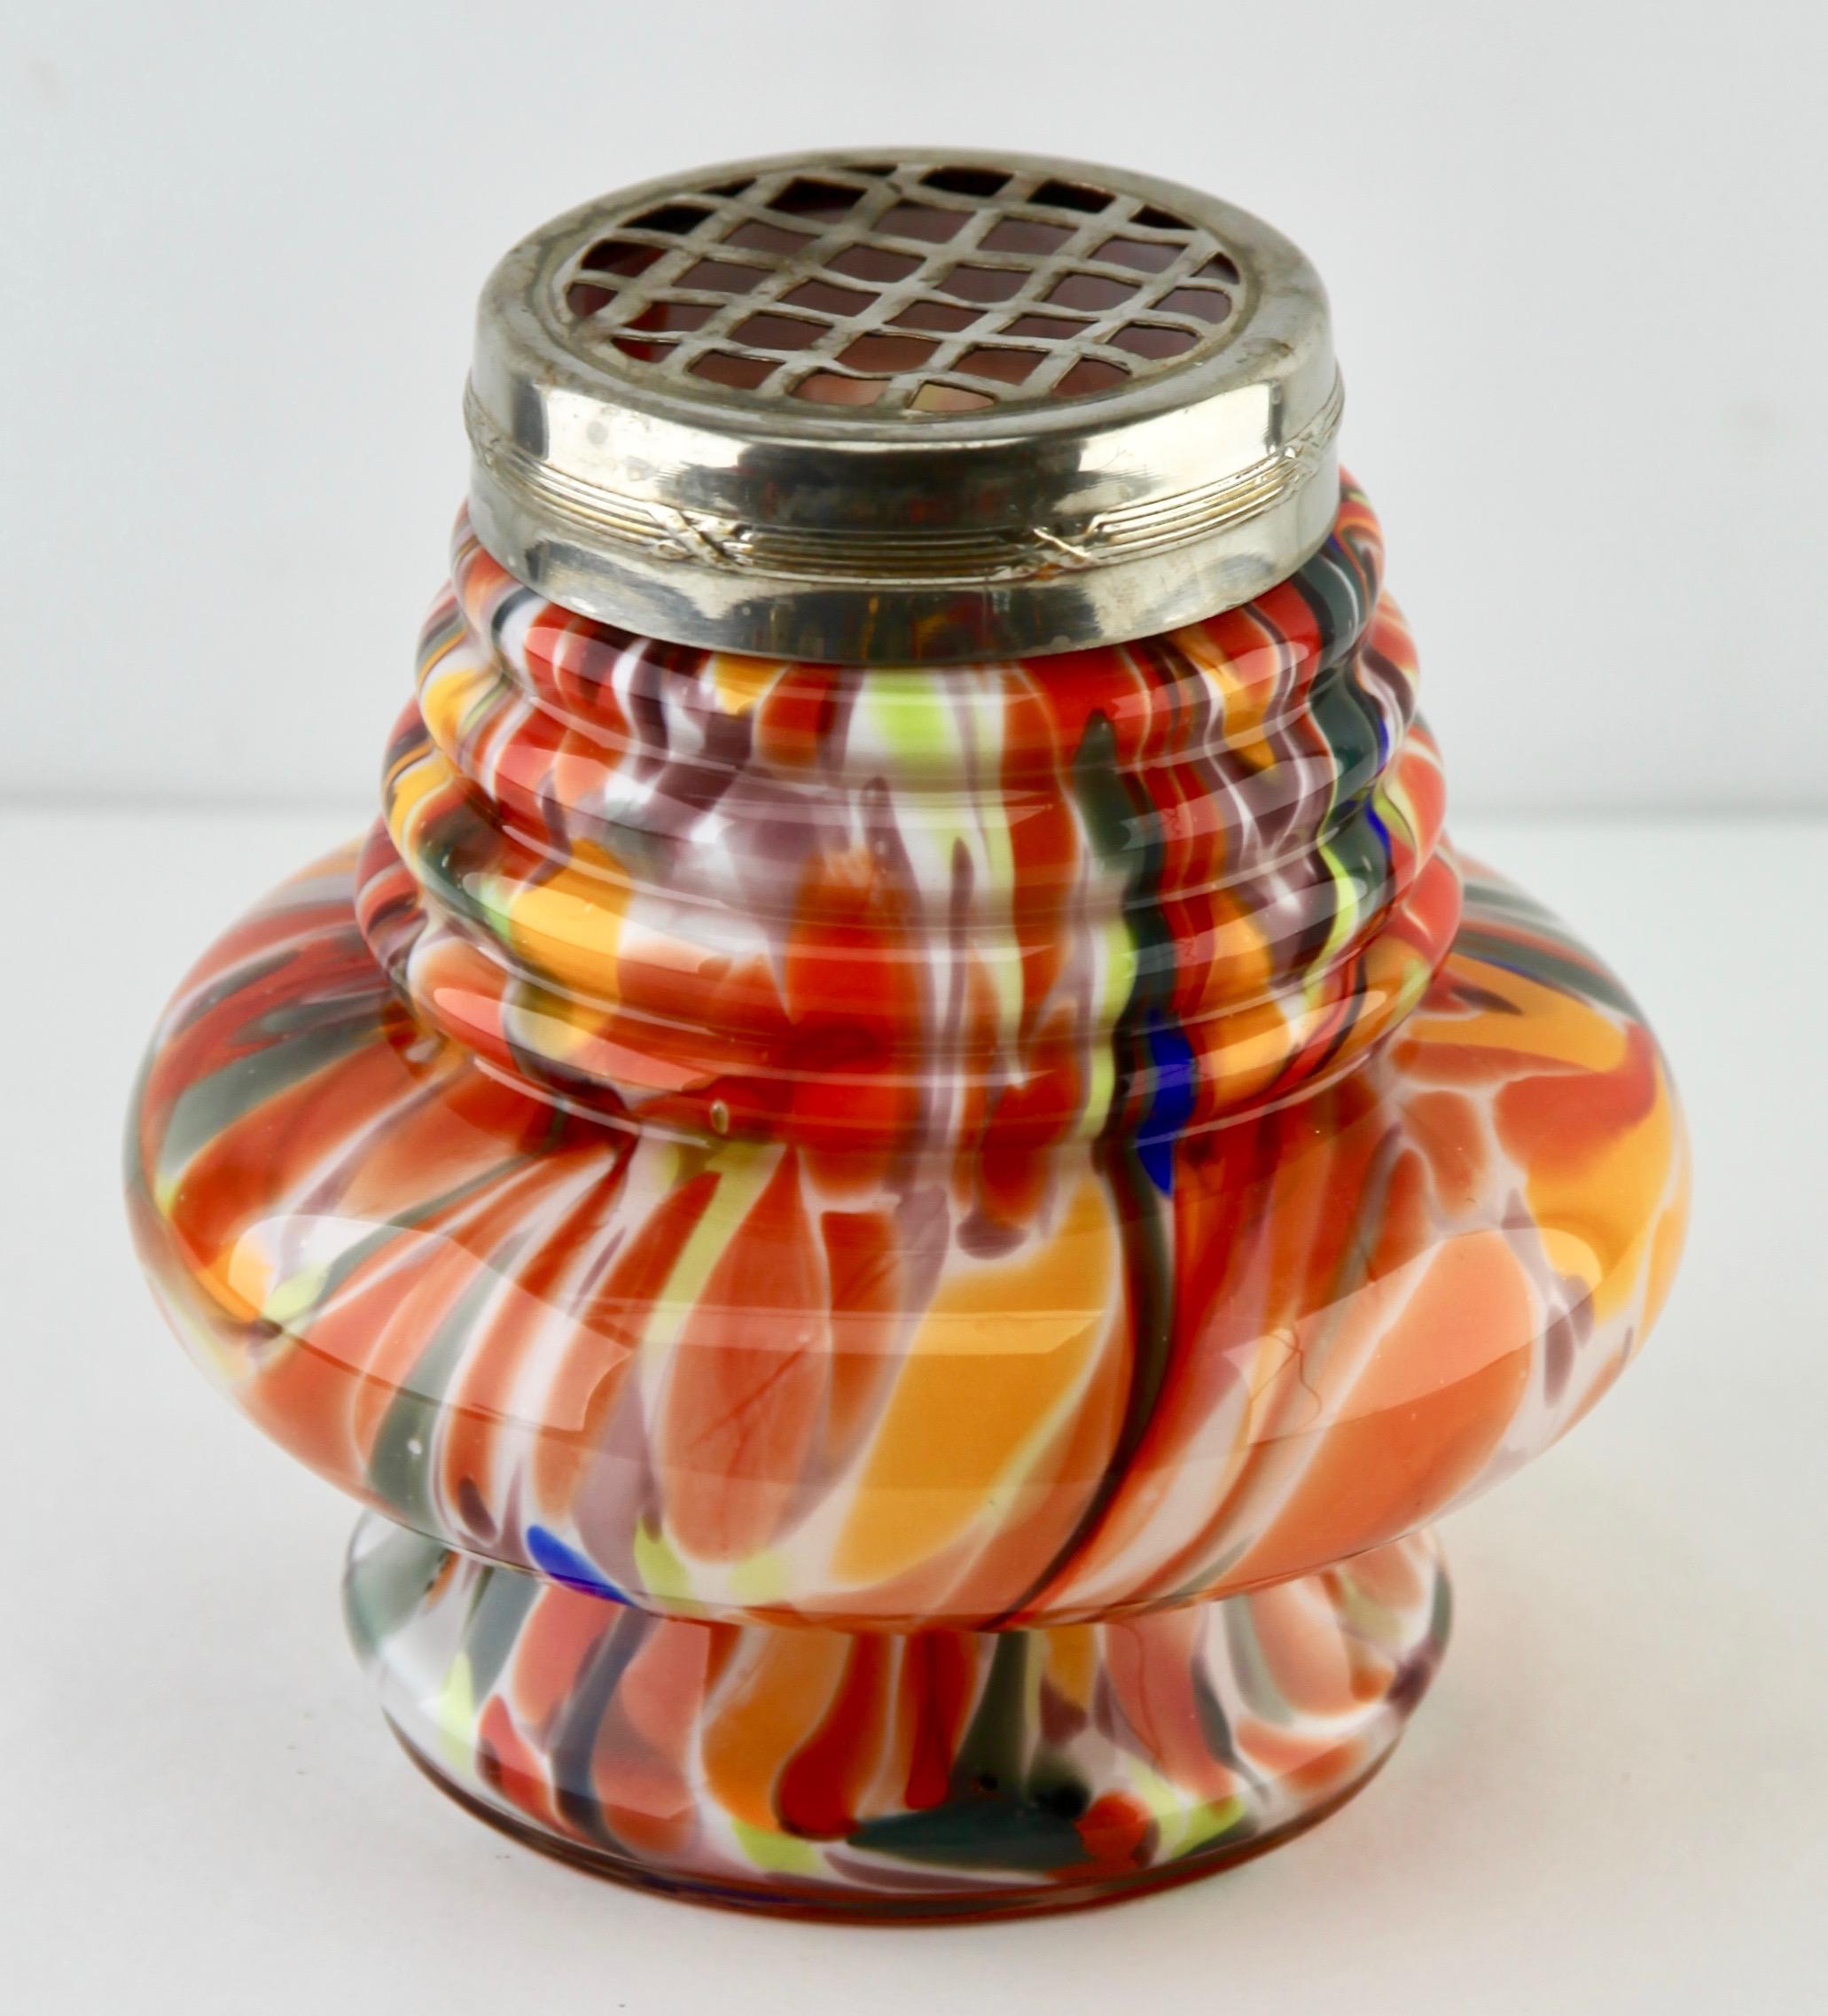 Startling spatter vase with multicolored colors, in hand blown splatter glass vase in the Art Deco style.
This design for vases is often called 'Pique fleurs' or 'rose-bowl' and is supplied with a fitted metal grille to support stems in an